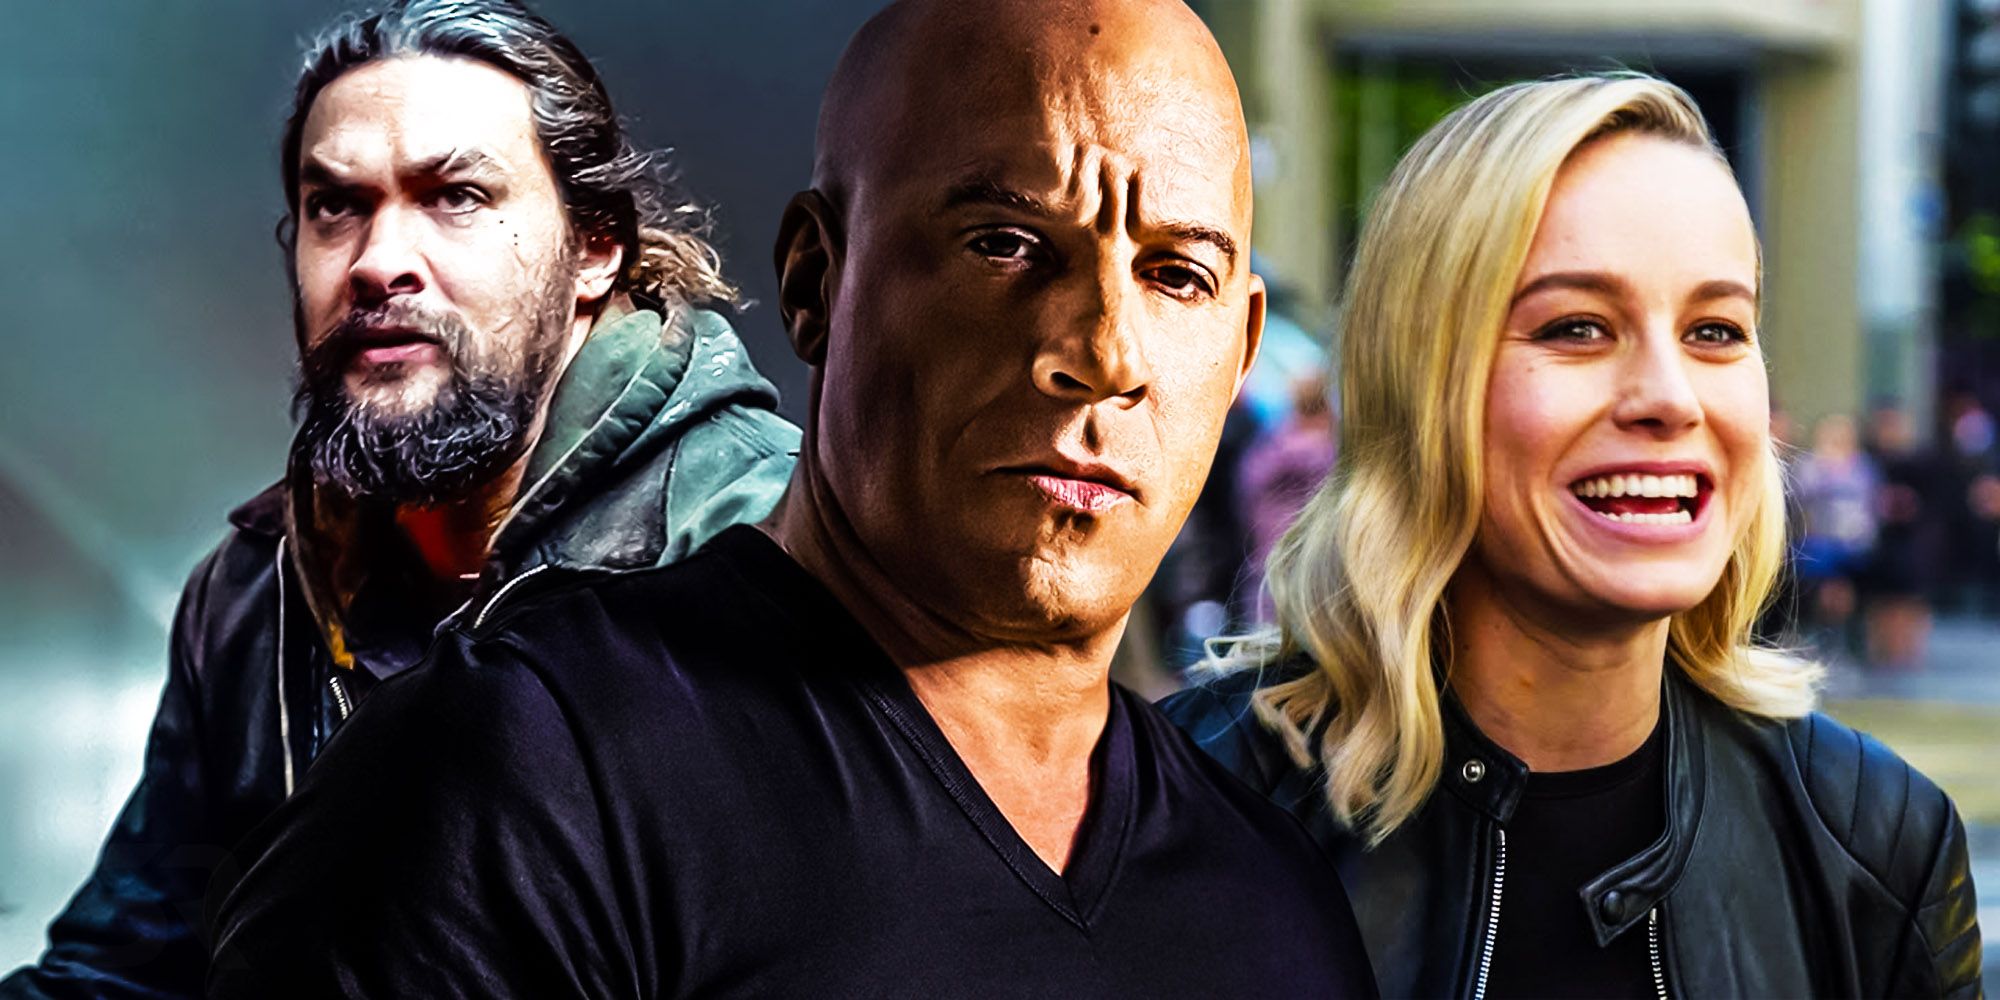 Jason Momoa, Vin Diesel, and Brie Larson in Fast X